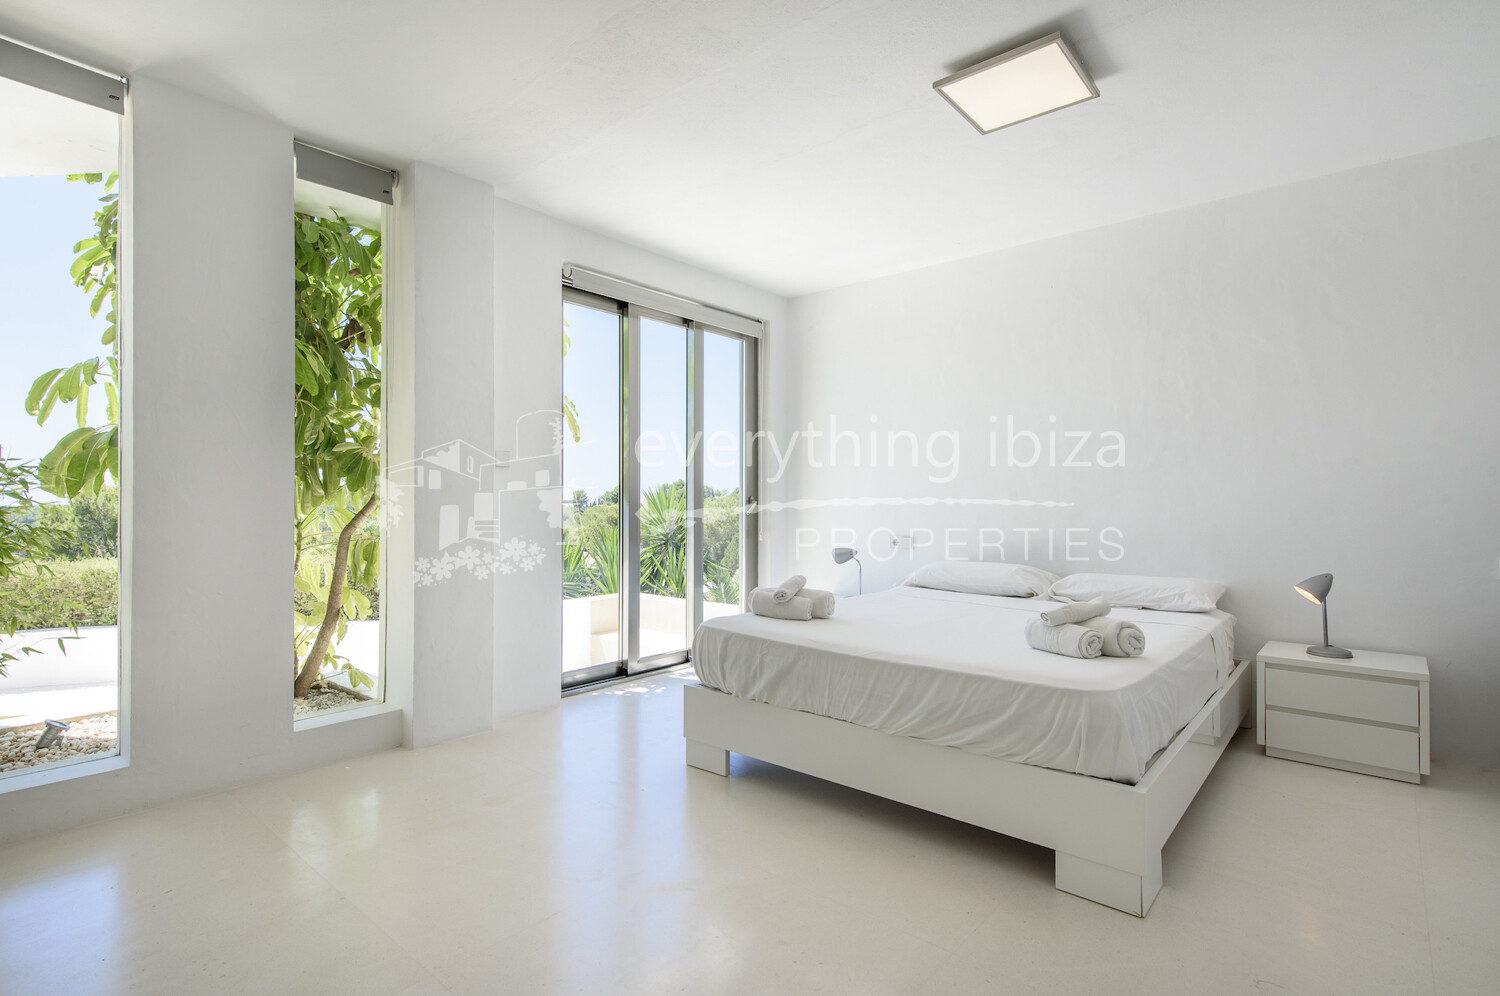 Luxurious Cosmopolitan Villa with Stunning Sea and Sunset Views, ref. 1609, for sale in Ibiza by everything ibiza Properties